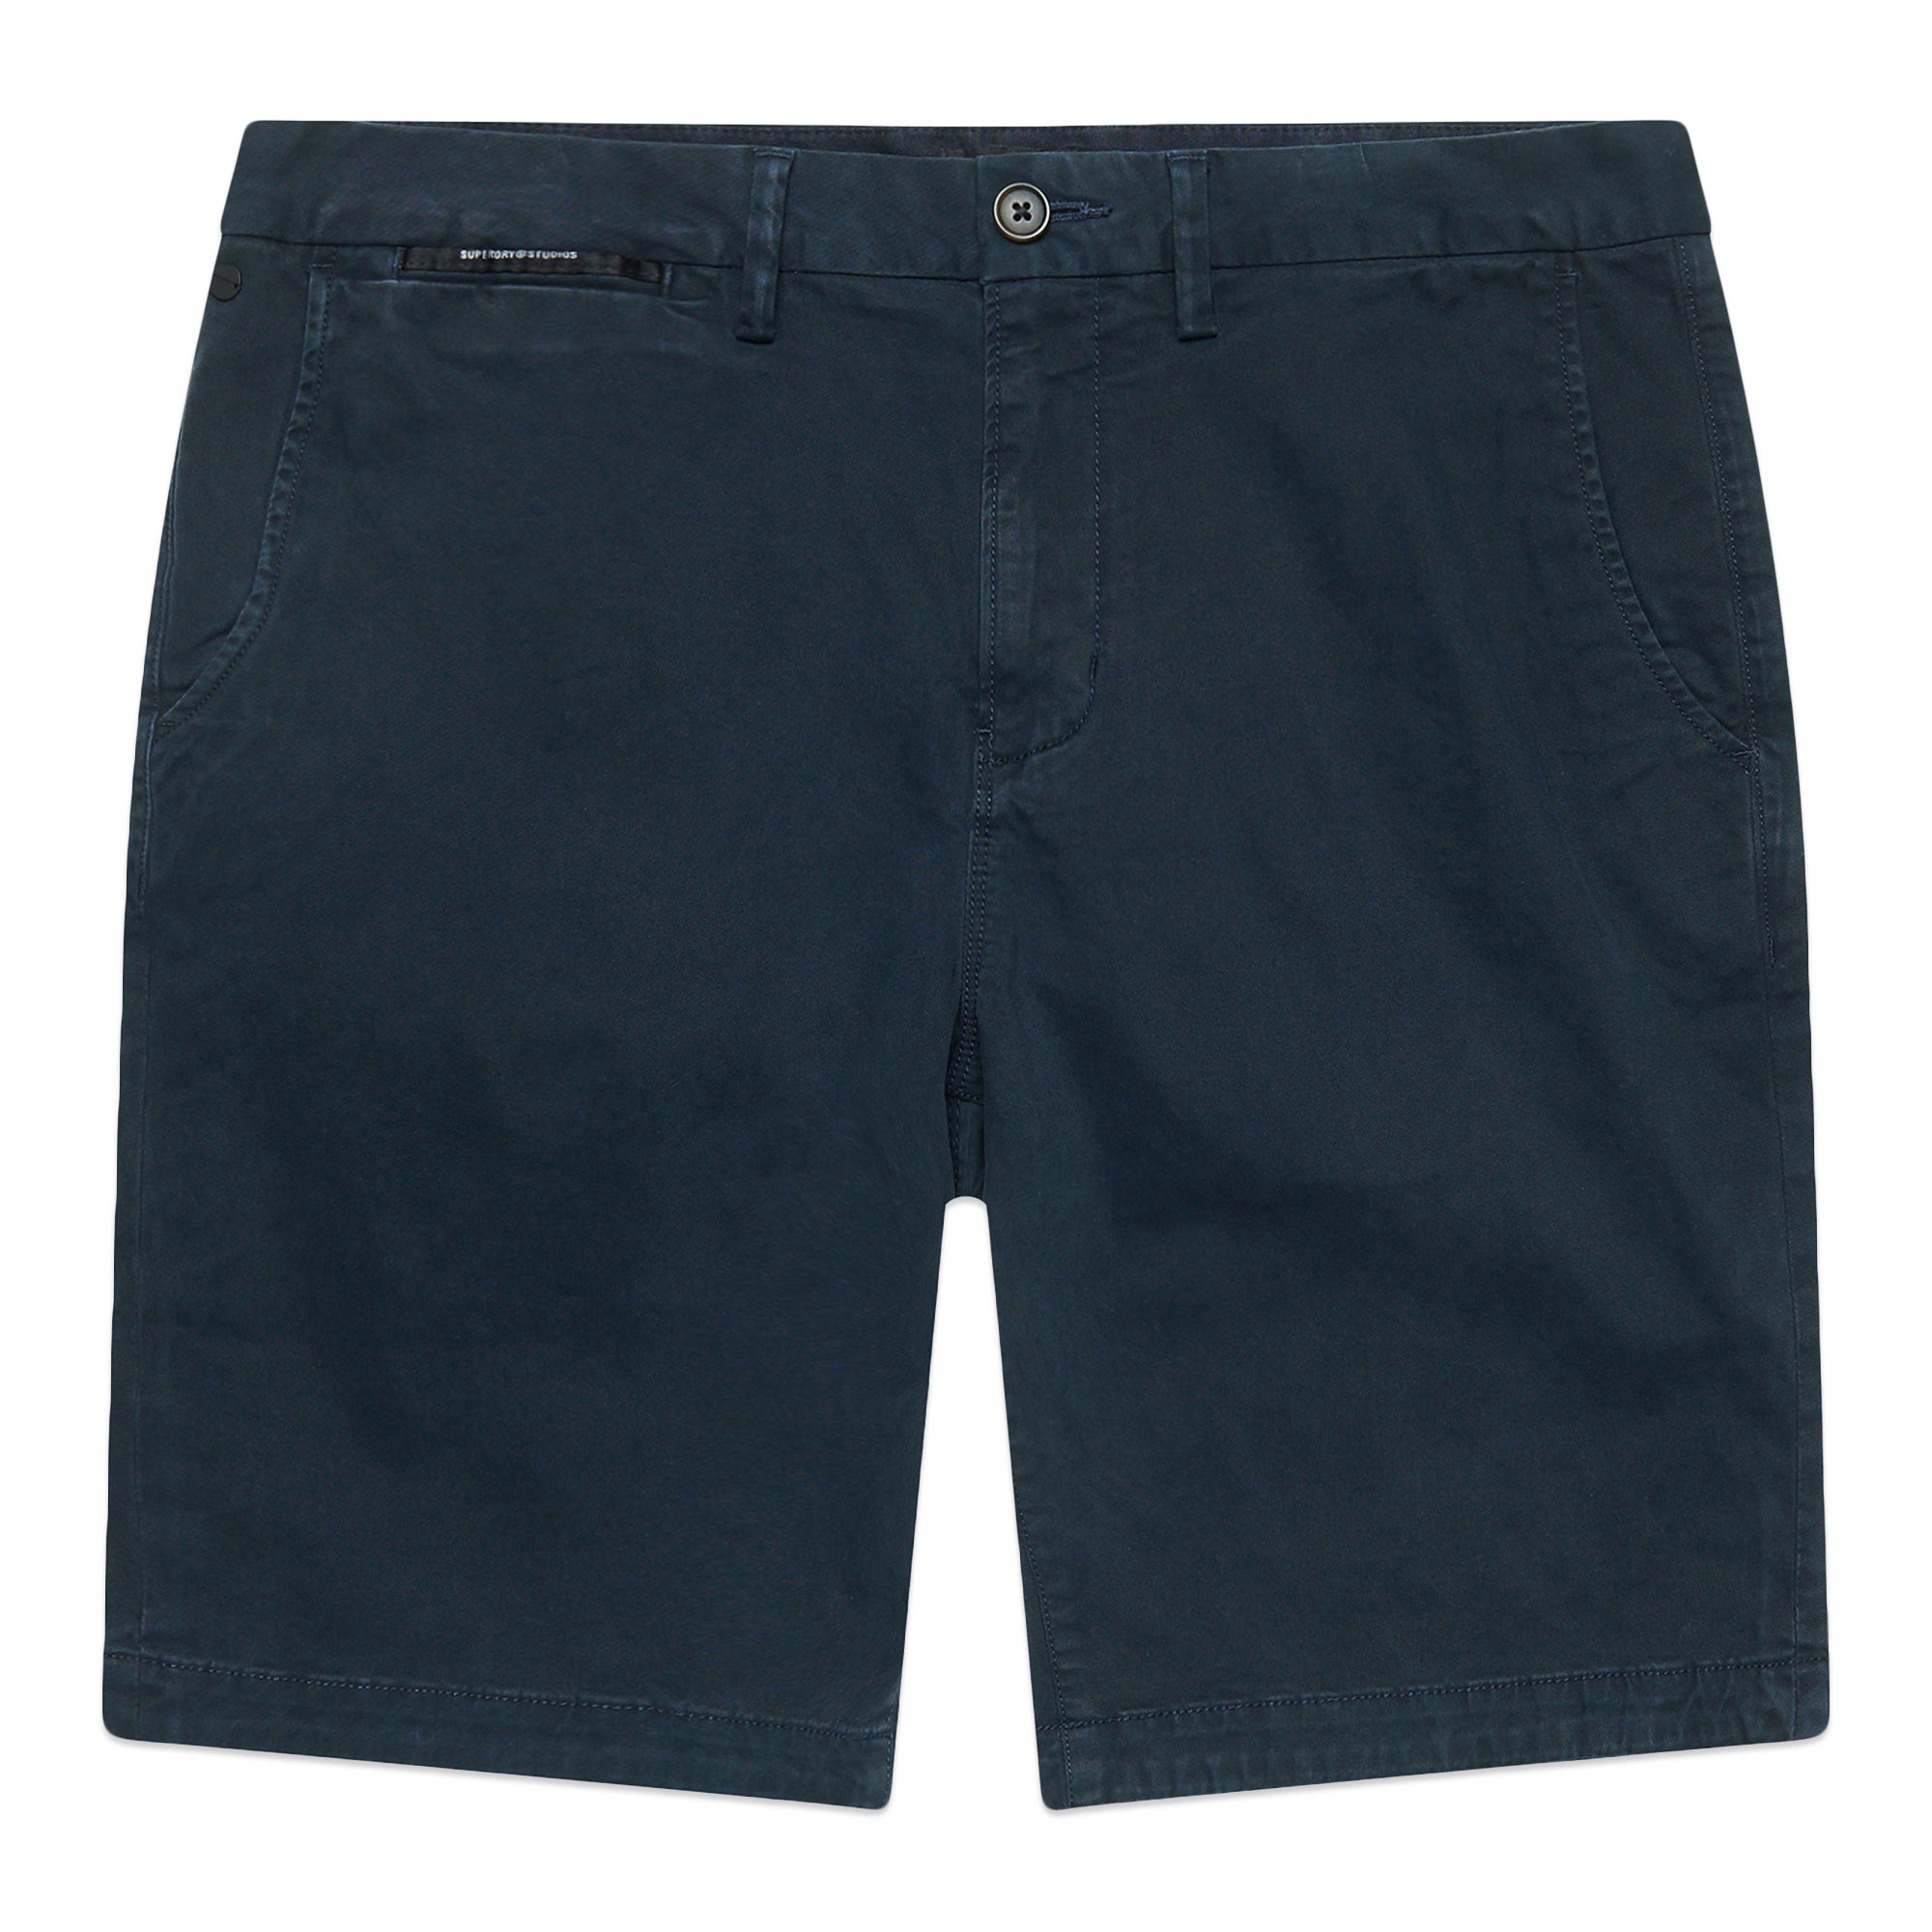 Superdry Studios Core Chino Short - Eclipse Navy